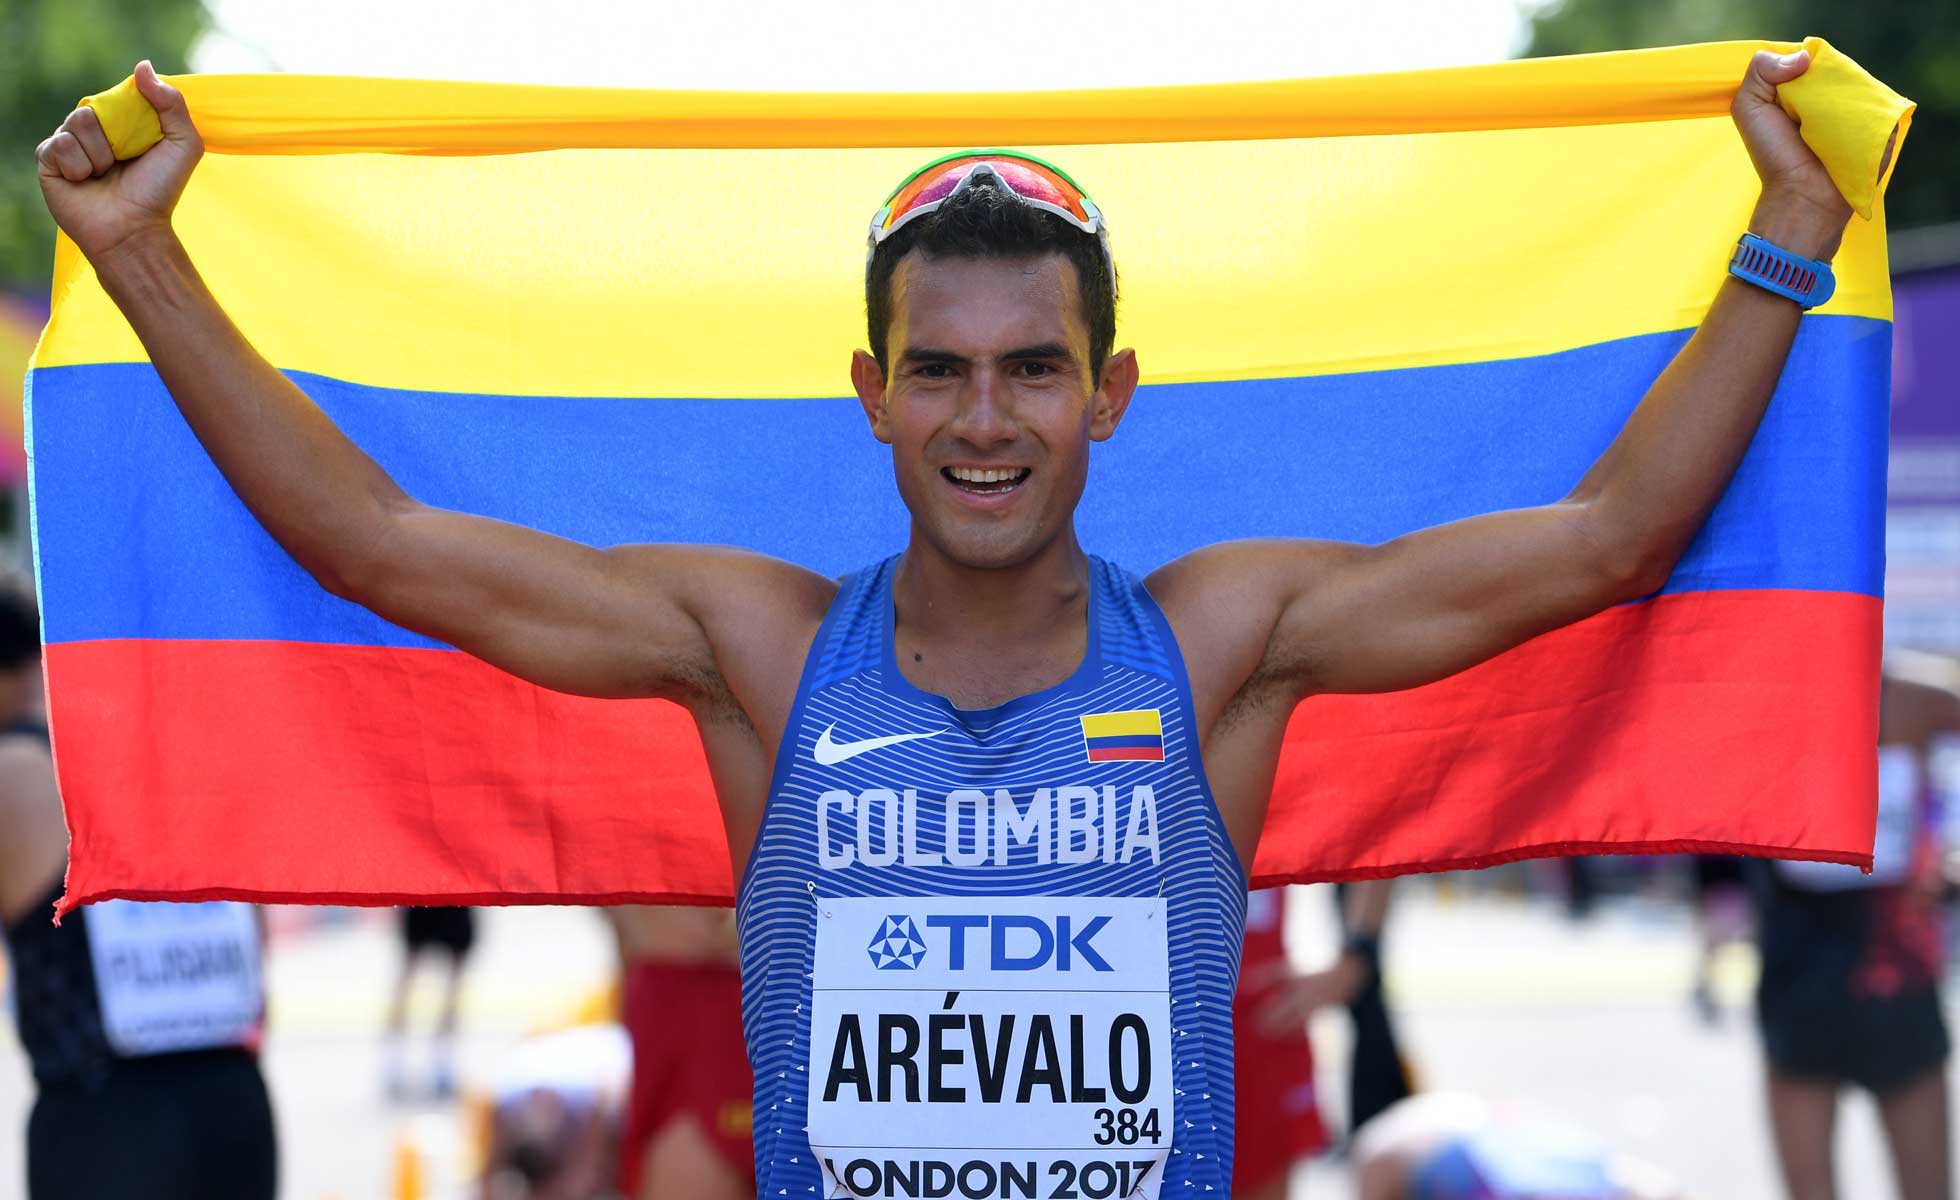 13105748Colombiano-Arevalo-Atletismo-EFE